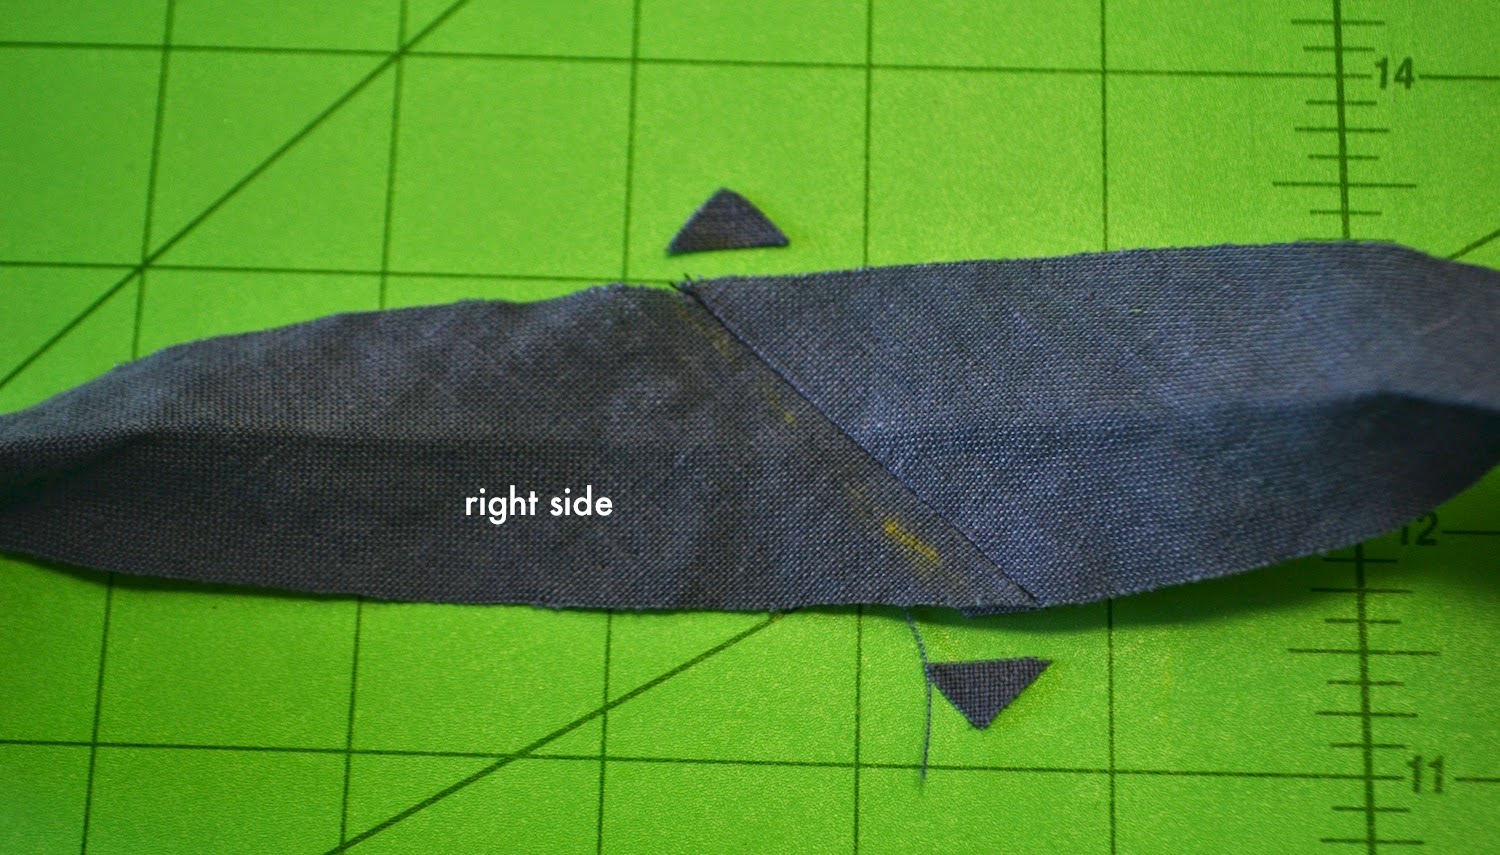 ISSUE 9 - ATTACHING DOUBLE FOLD BIAS BINDING — In the Folds